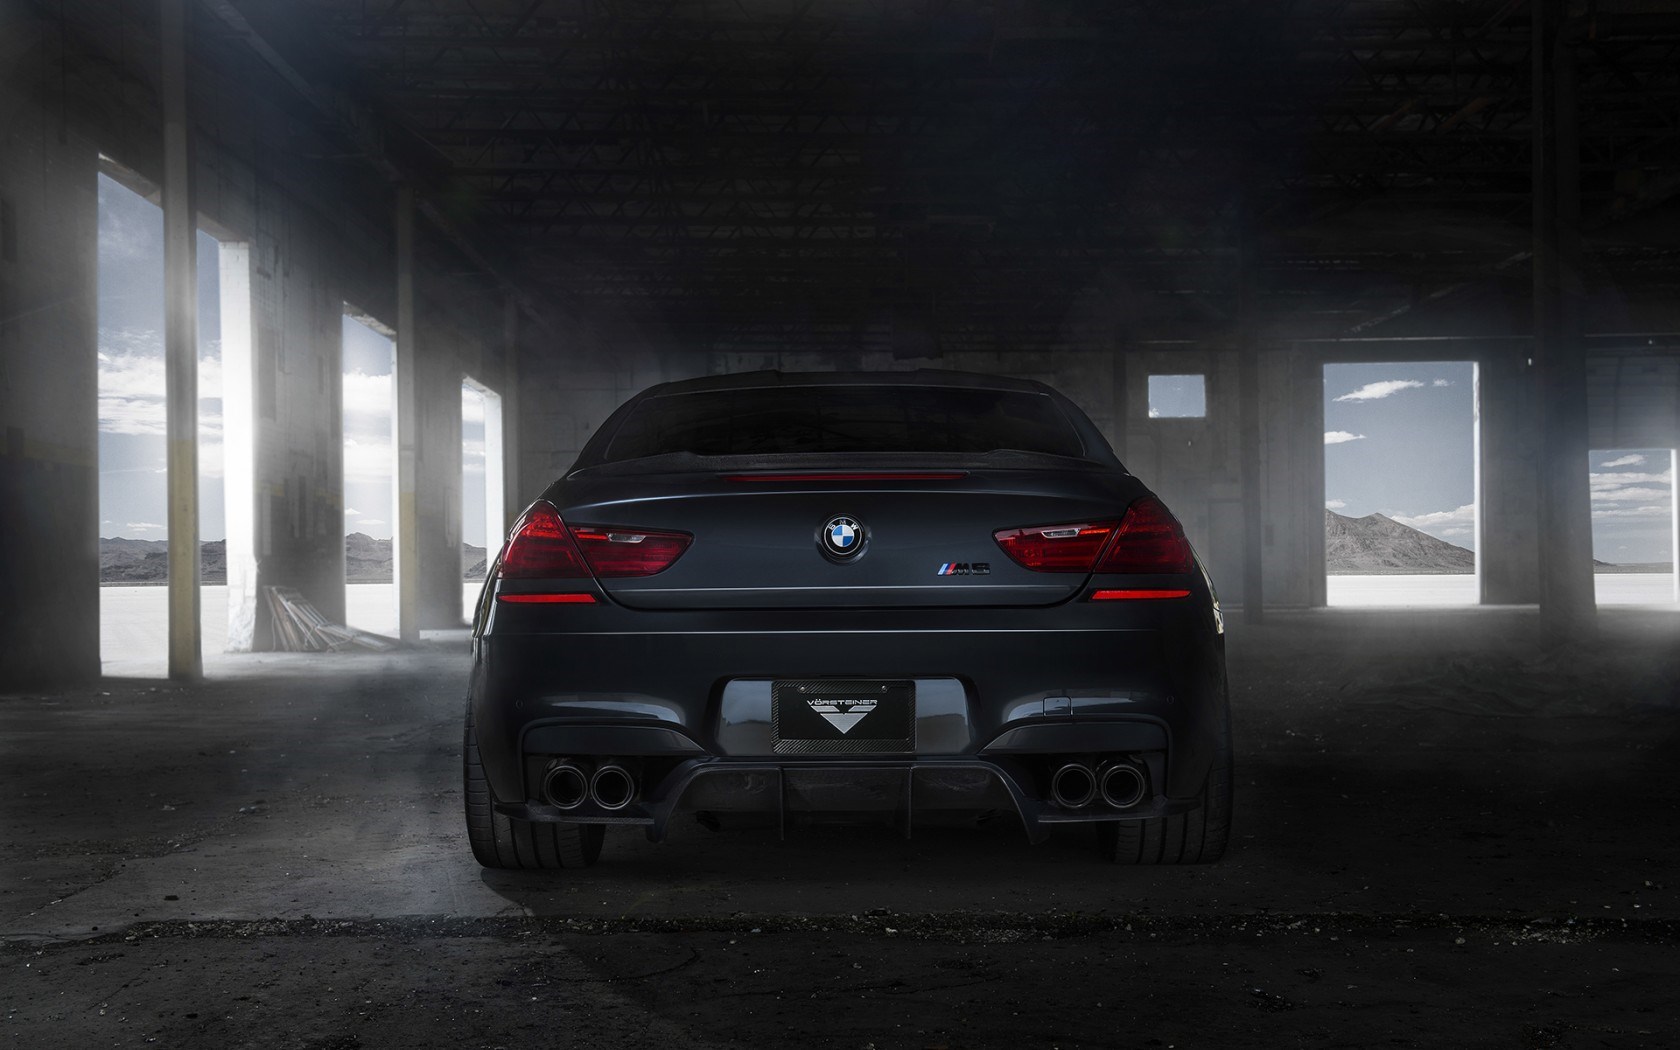 BMW M6 Coupe F13 Black Tuning Car